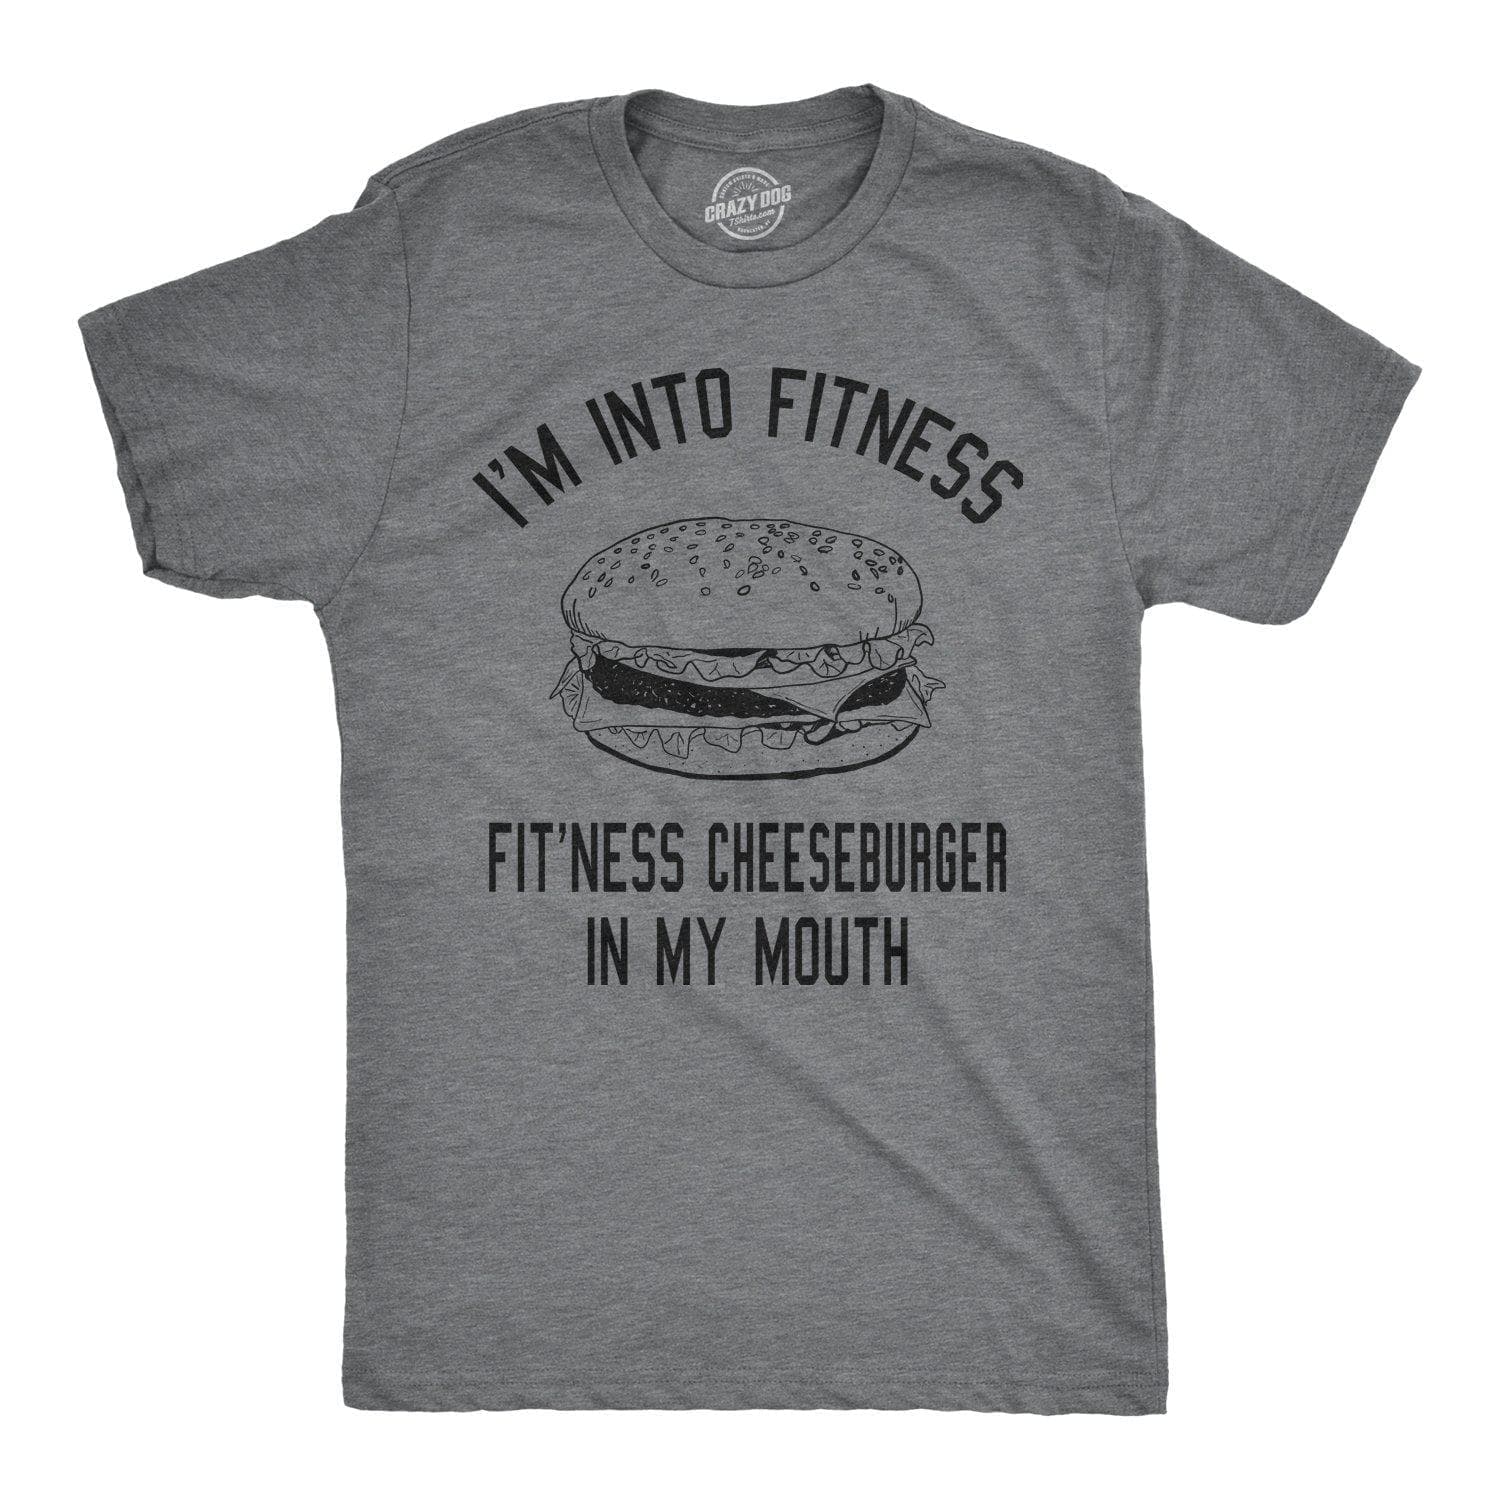 Fitness Cheeseburger In My Mouth Men's Tshirt  -  Crazy Dog T-Shirts